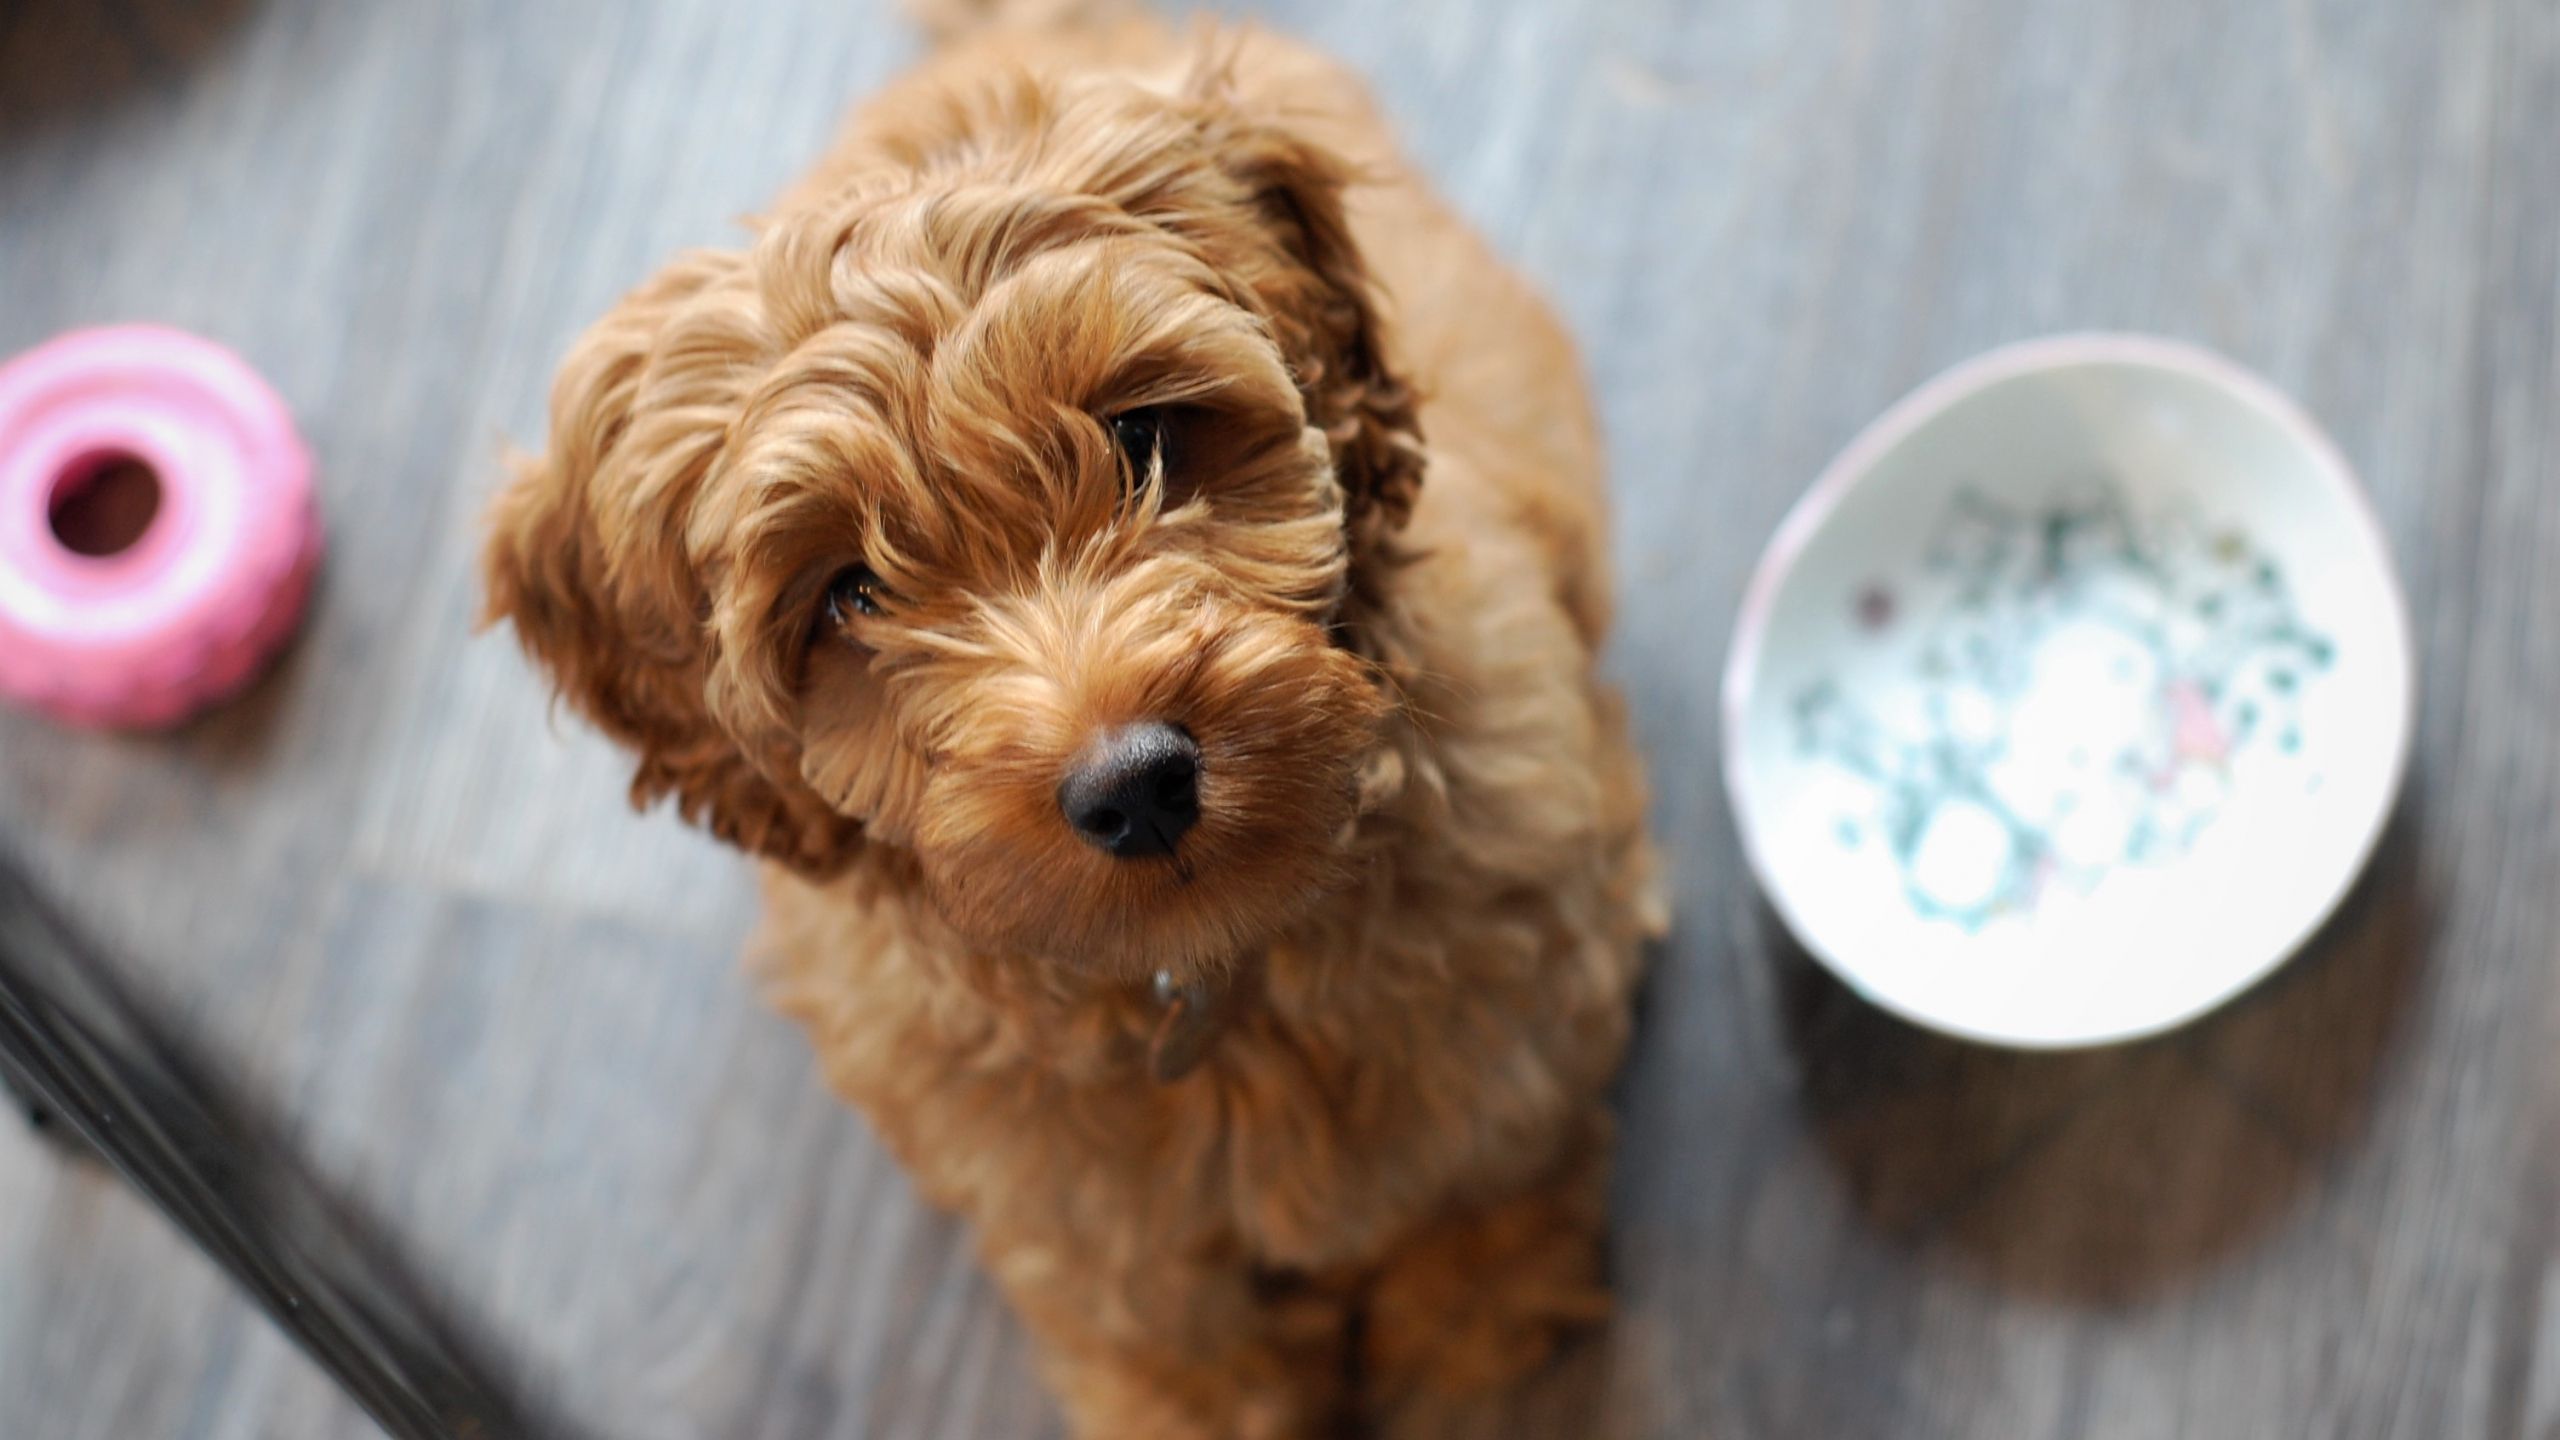 Desktop Wallpaper Cute Puppy, Labradoodle, Looking Up, HD Image, Picture, Background, Wxkf T